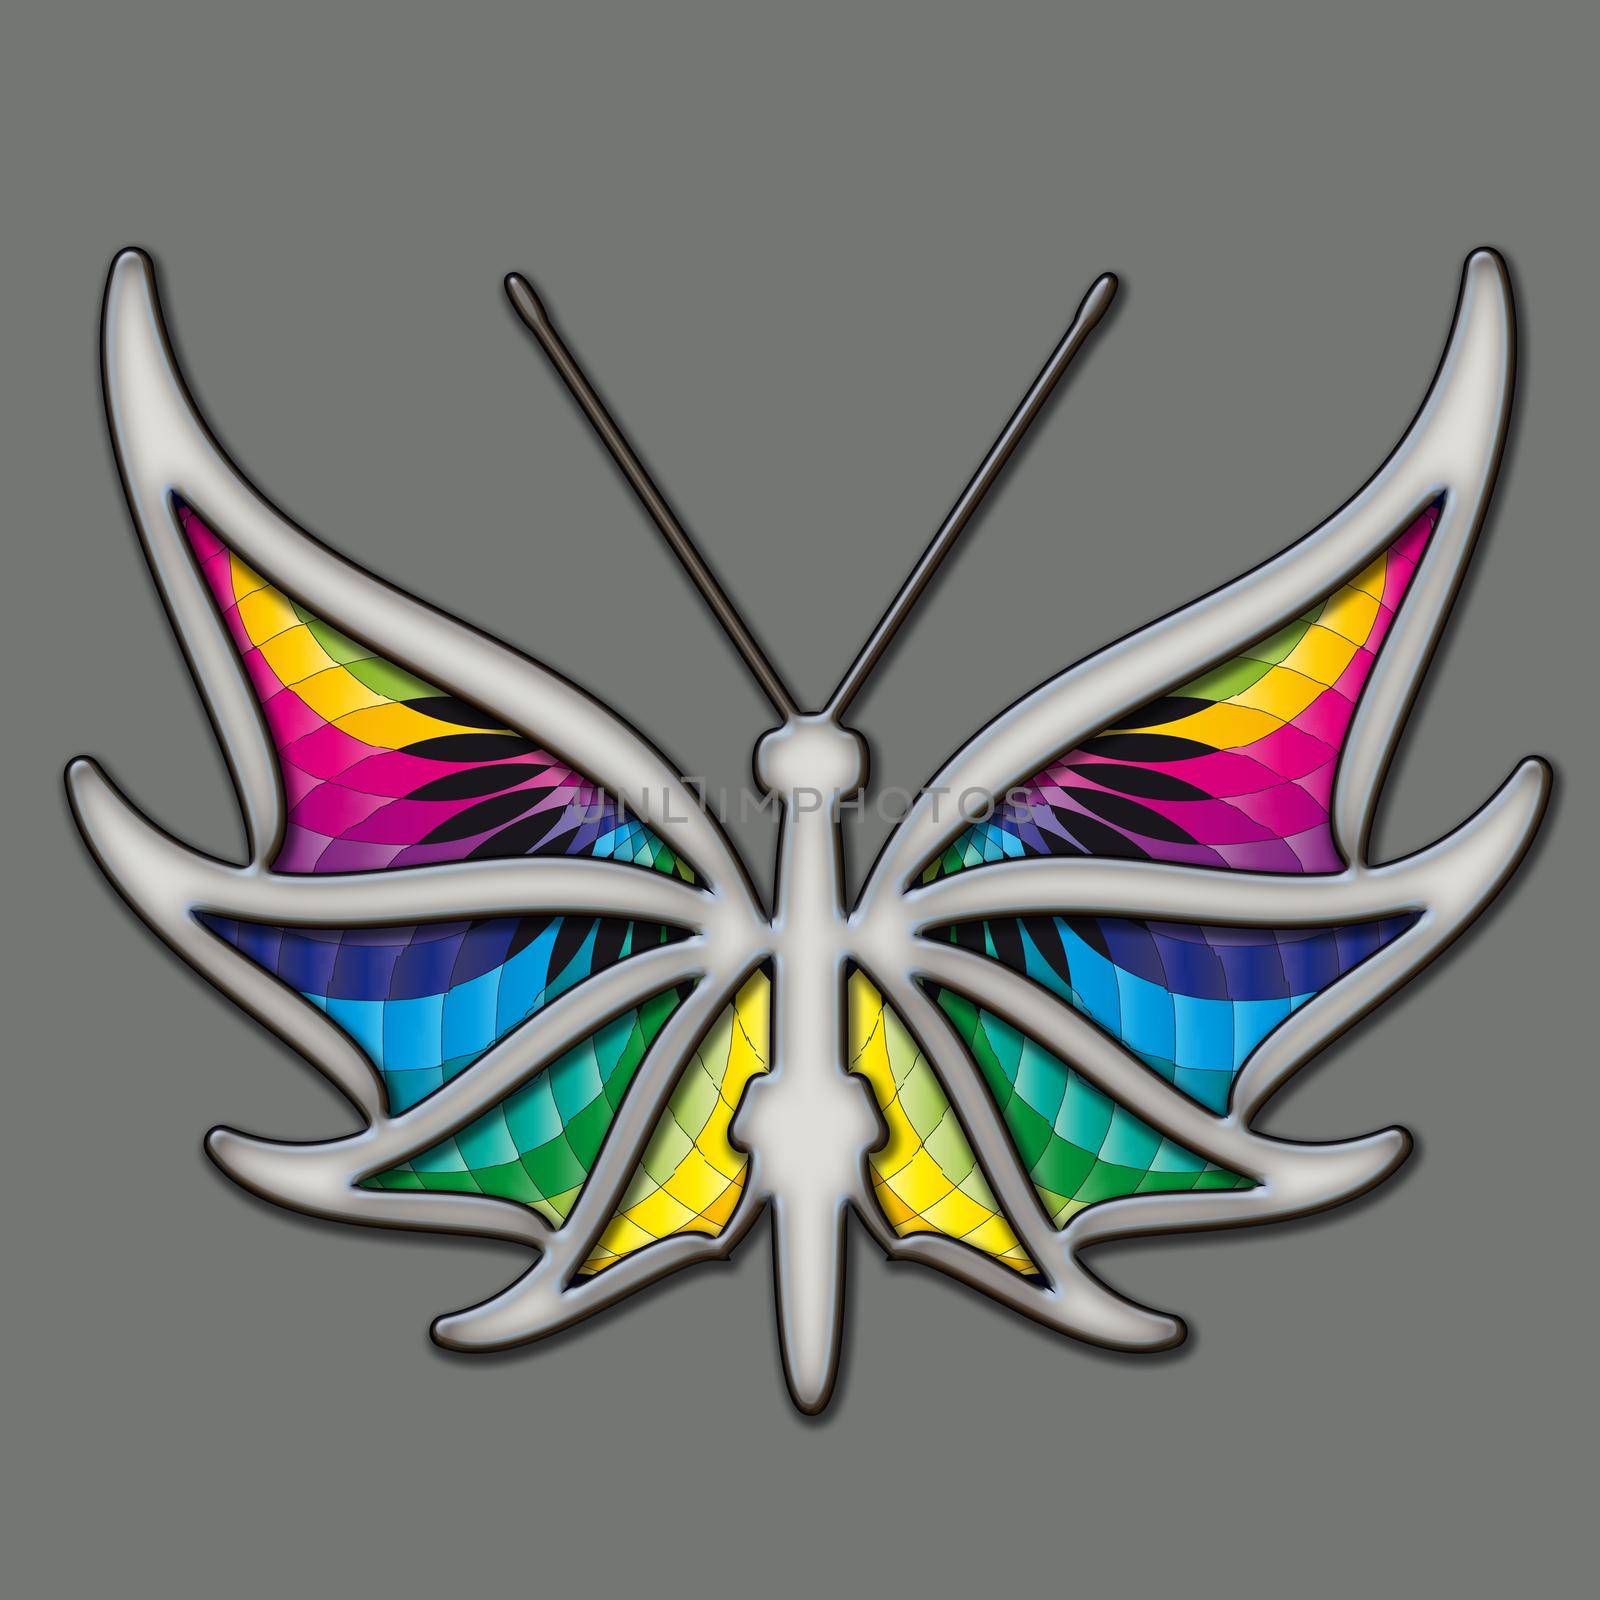 3D illustration of colorful ornament butterfly with wings filled with abstract fractal